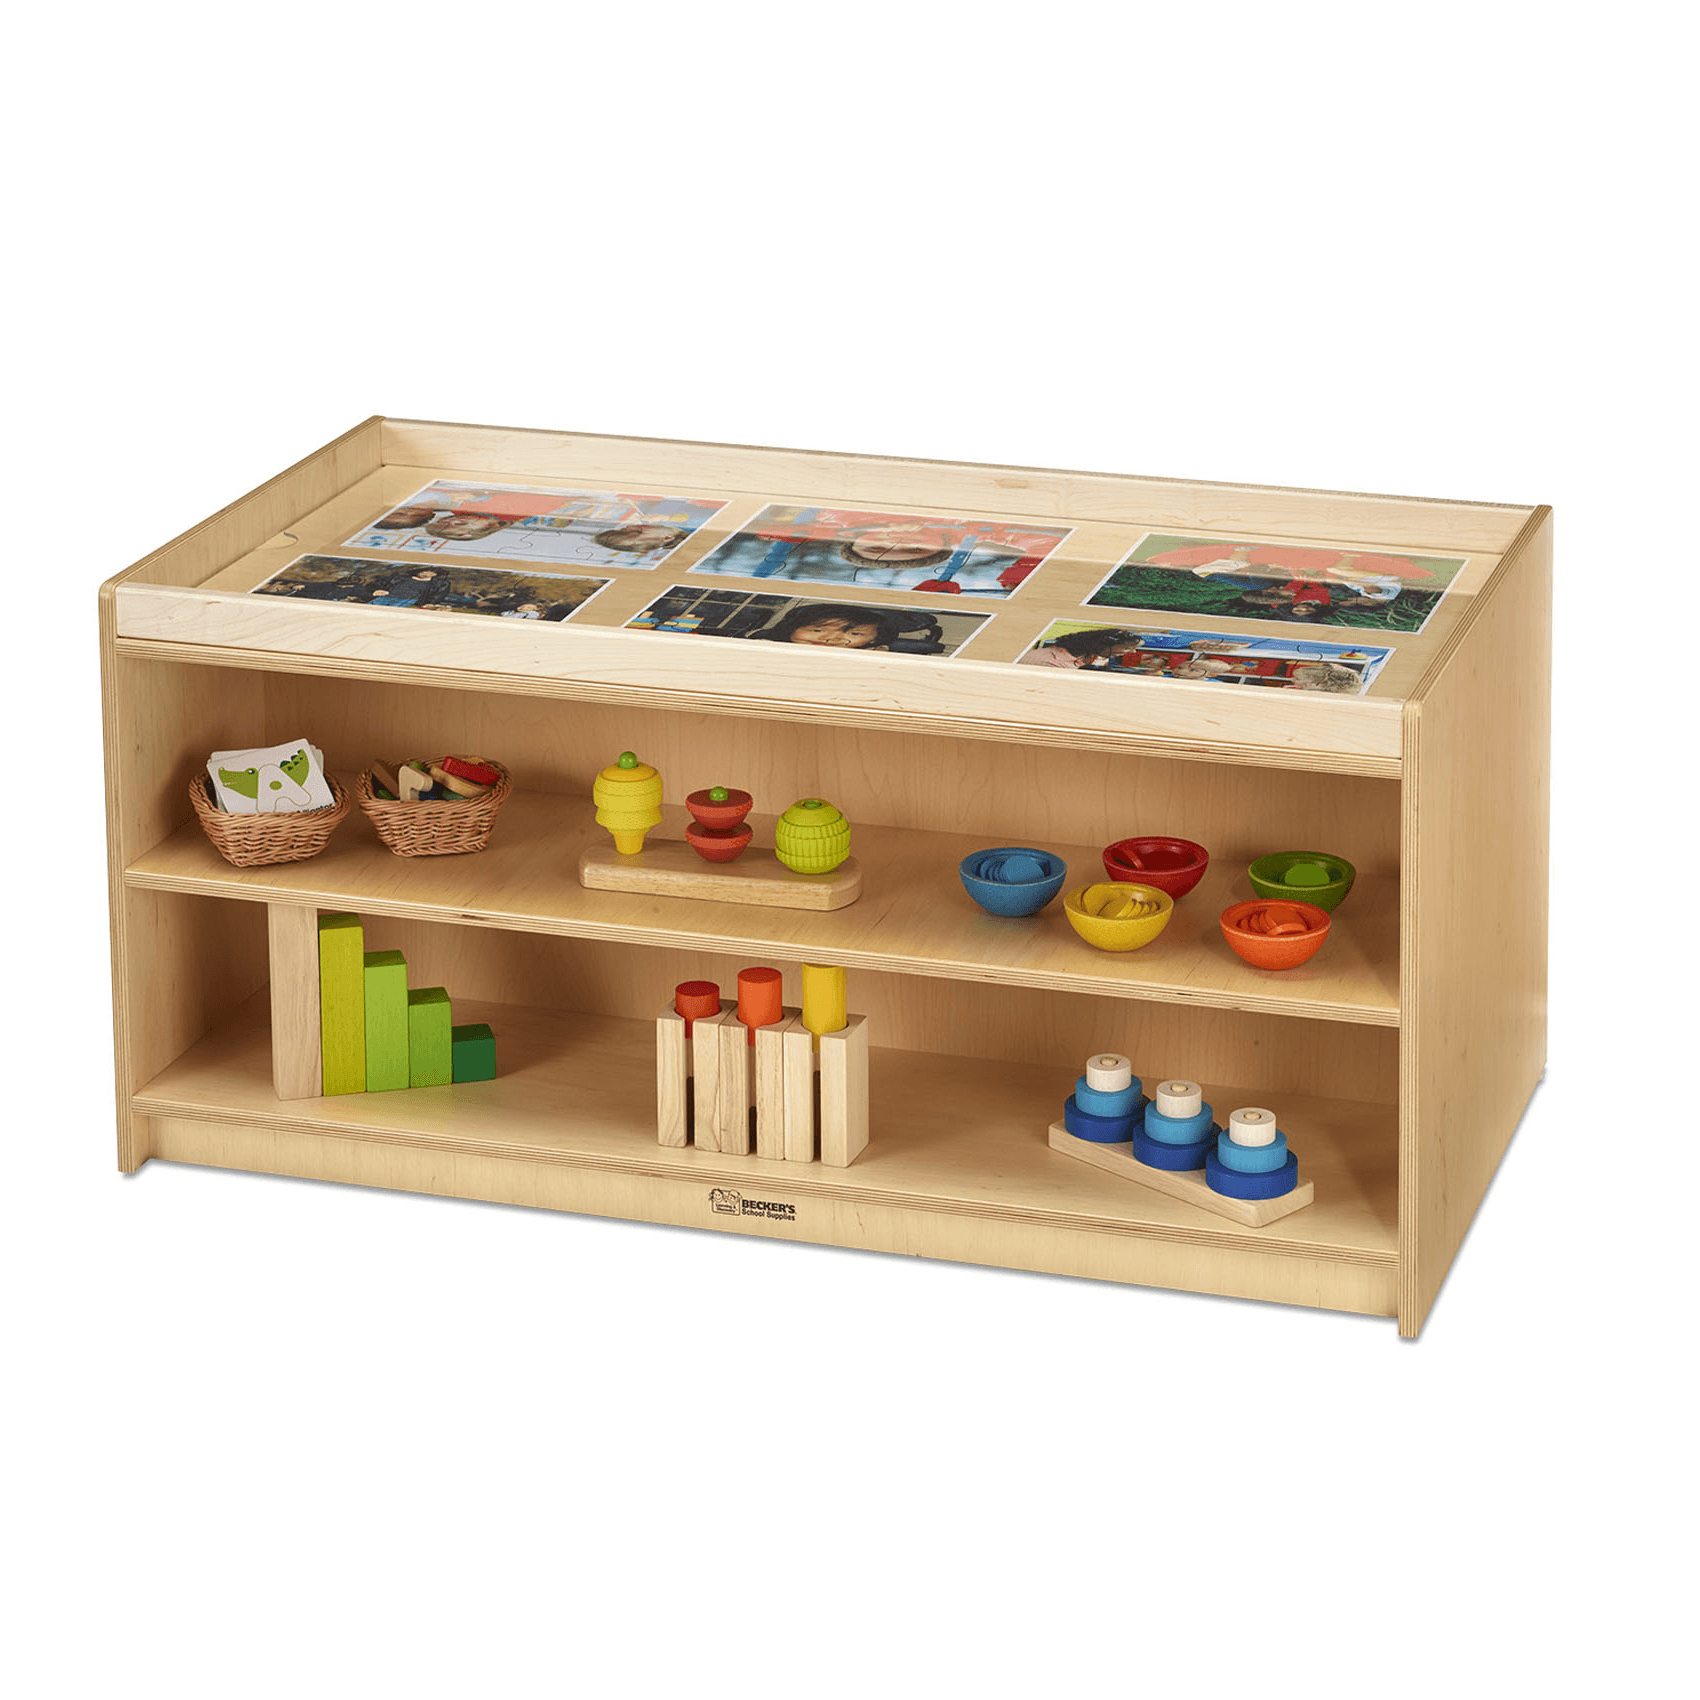 Montessori Becker's Infant & Toddler Look-and-See Double-Sided Shelf